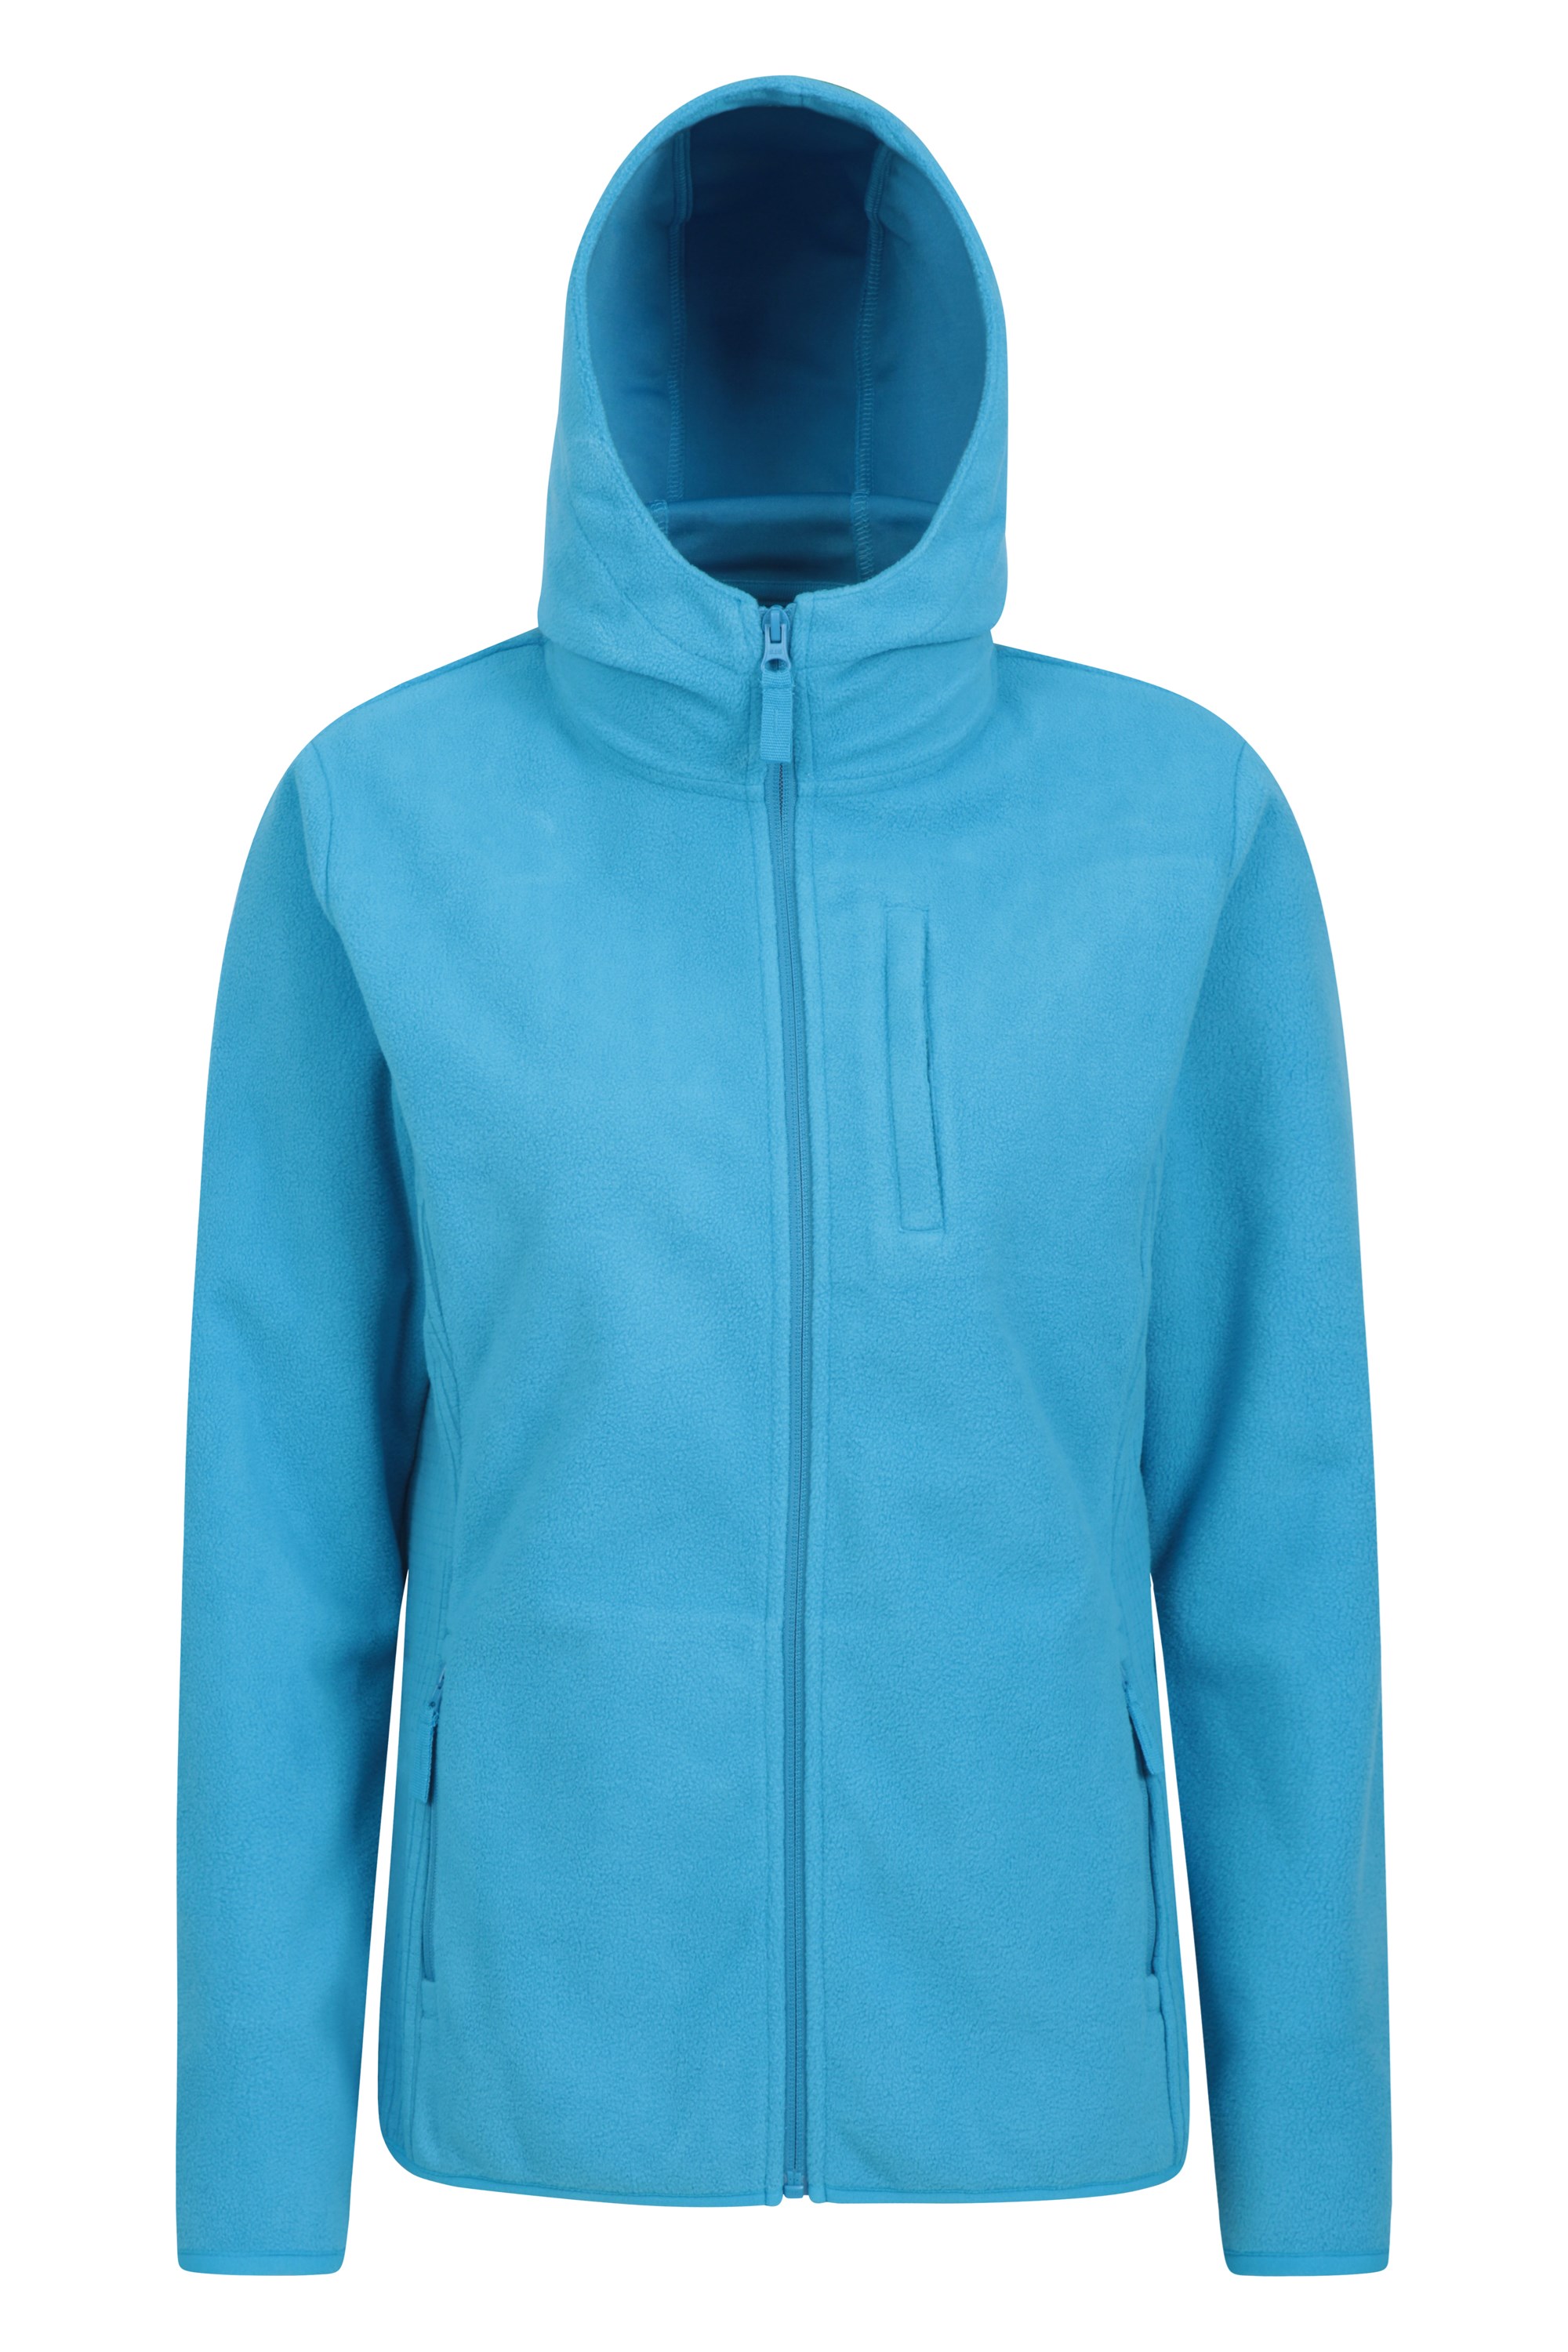 Expedition Tech Womens Full-Zip Hoodie - Teal